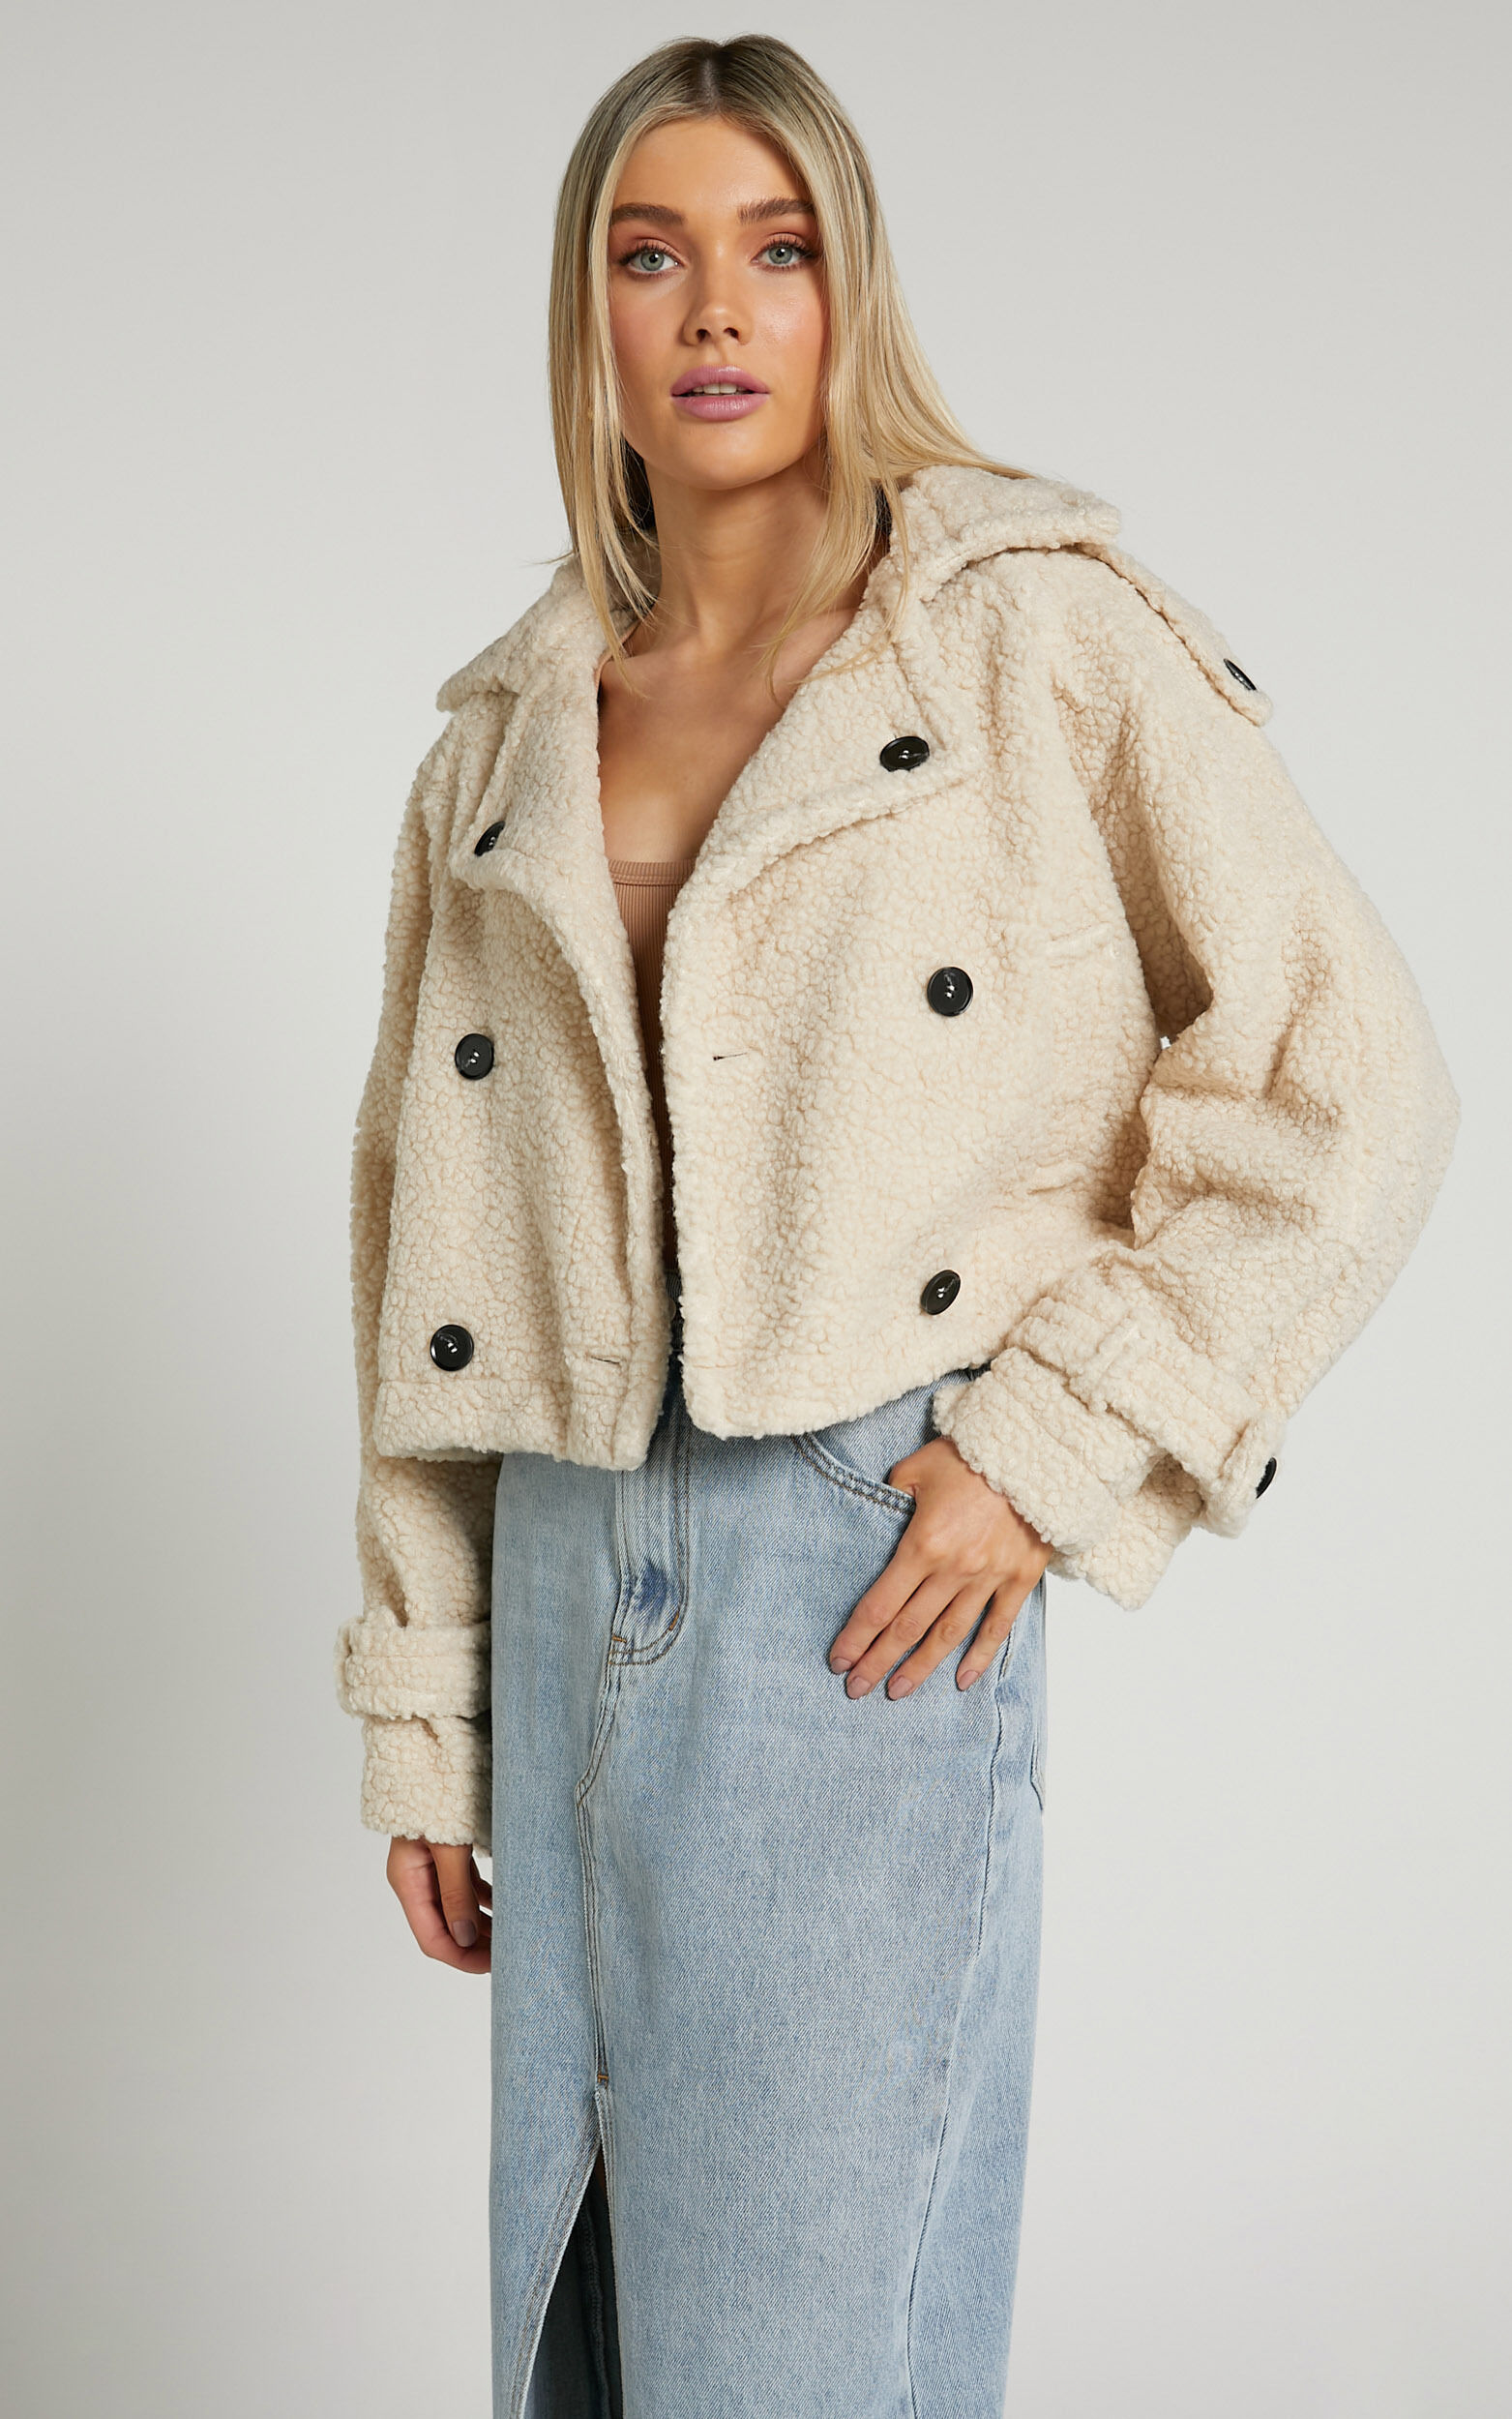 Kennedy Jacket - Borg Cropped Jacket in Cream - 06, CRE1